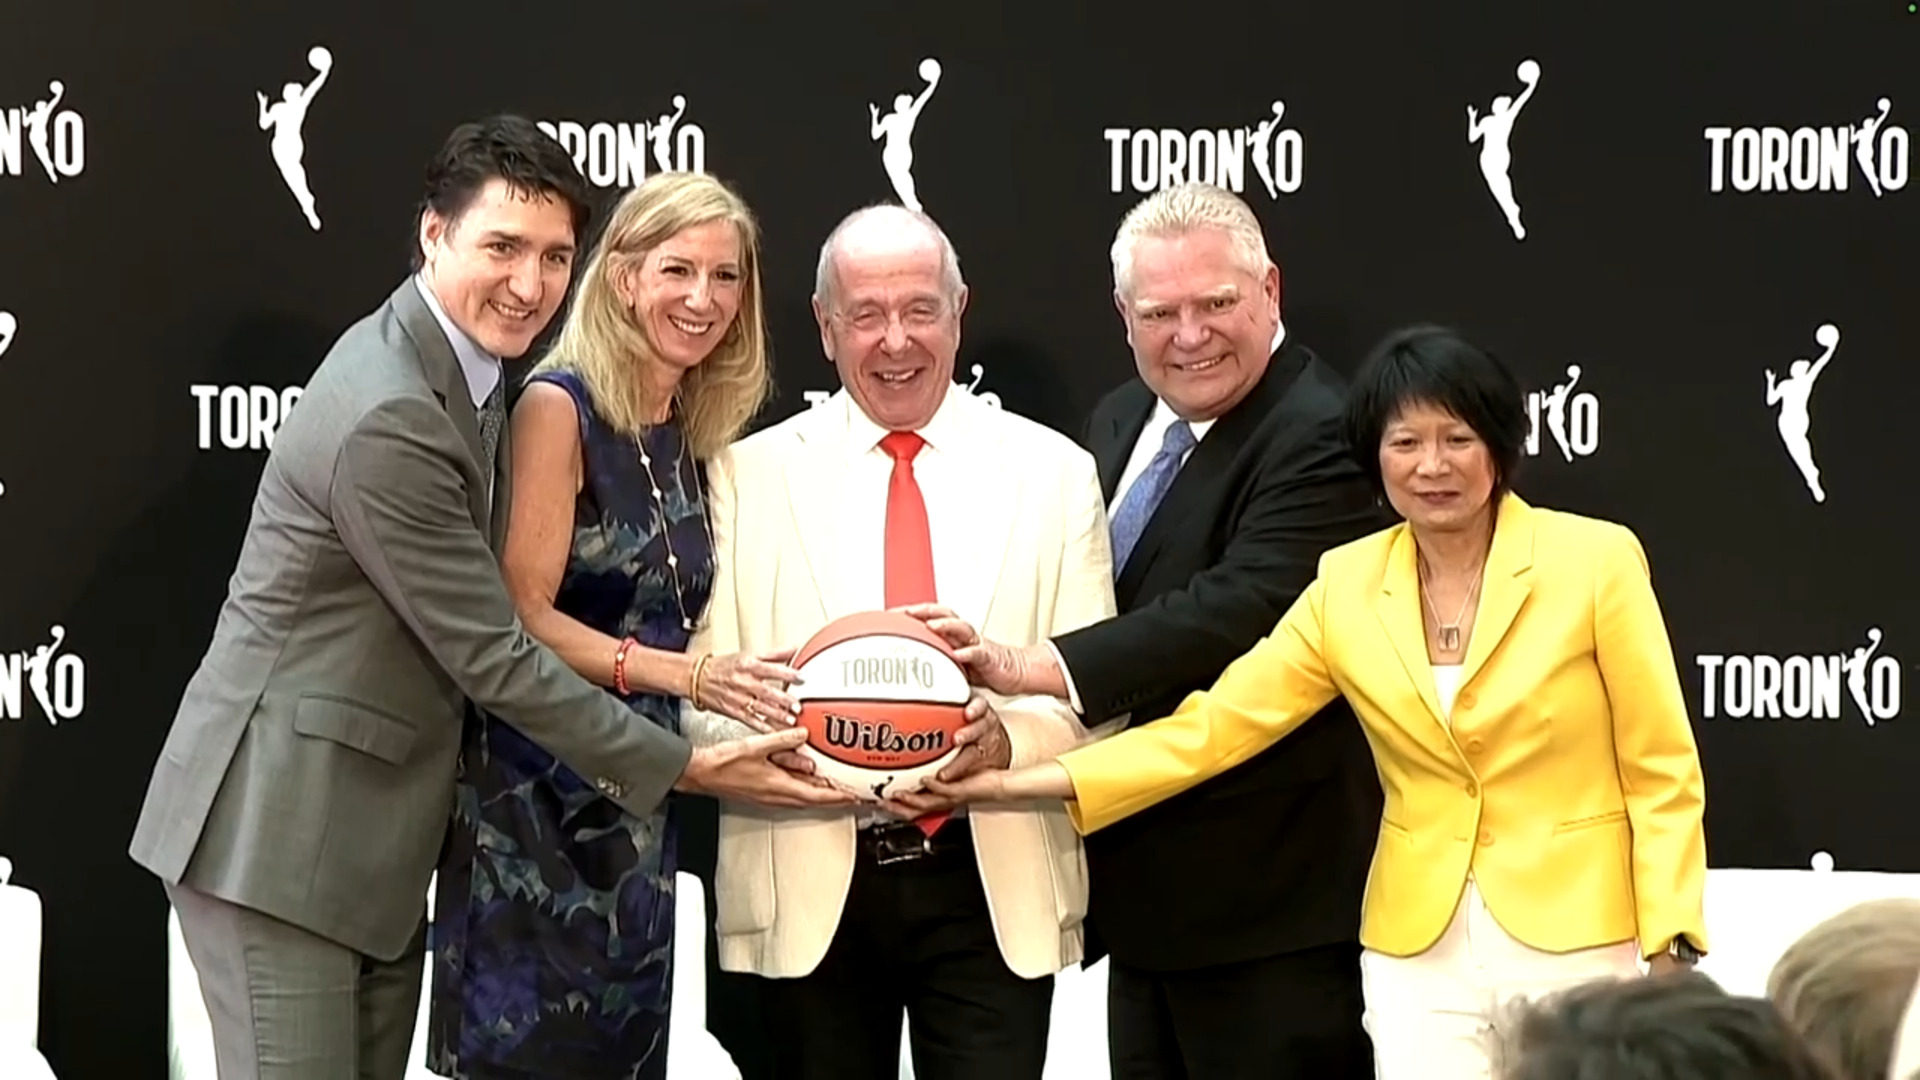 Trudeau welcomes the WNBA to Canada